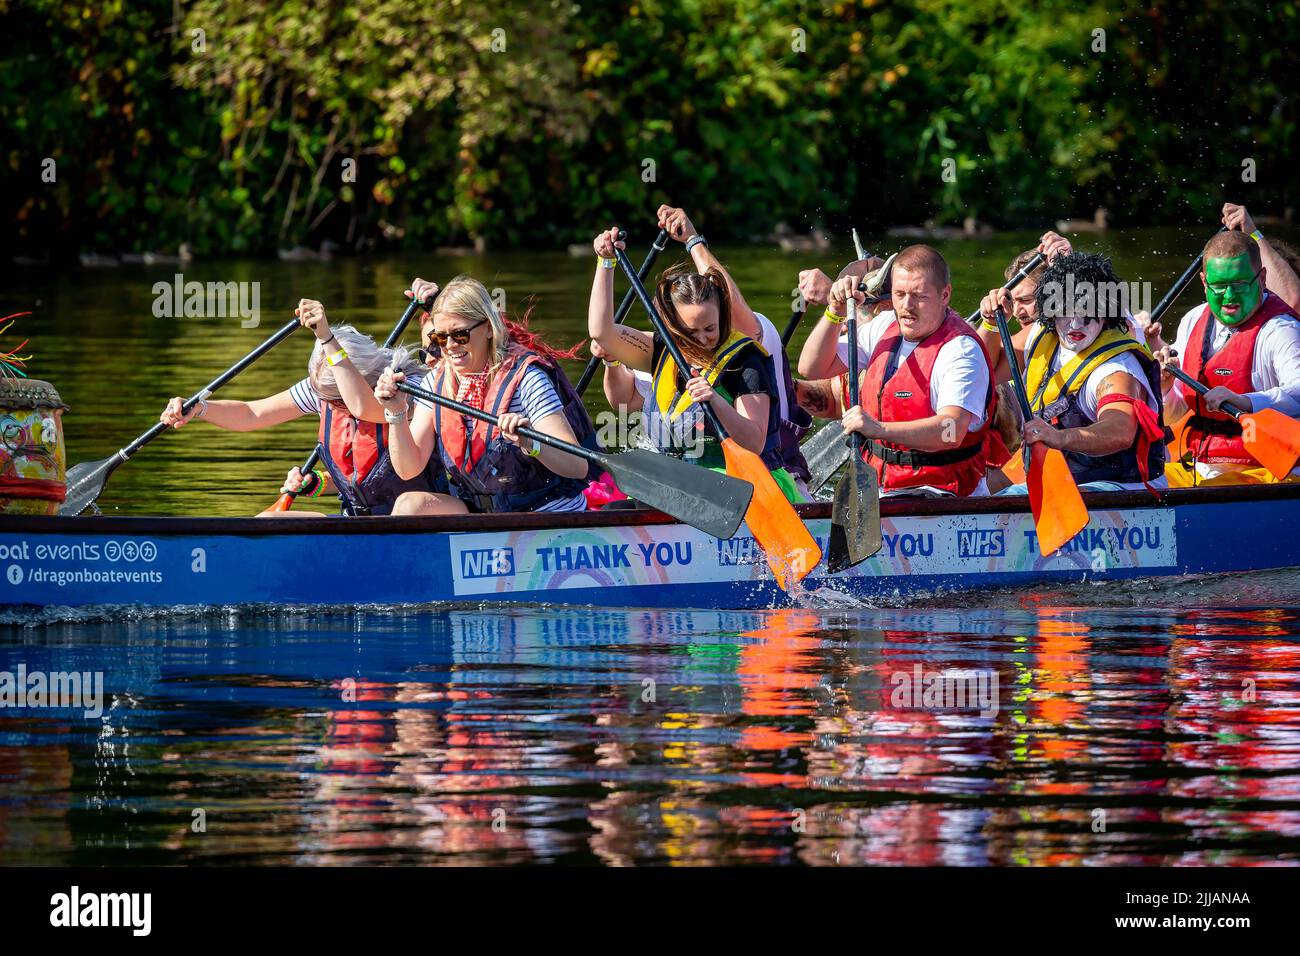 Group of work colleagues, some in fancy dress, paddle their Dragon Boat badly Stock Photo